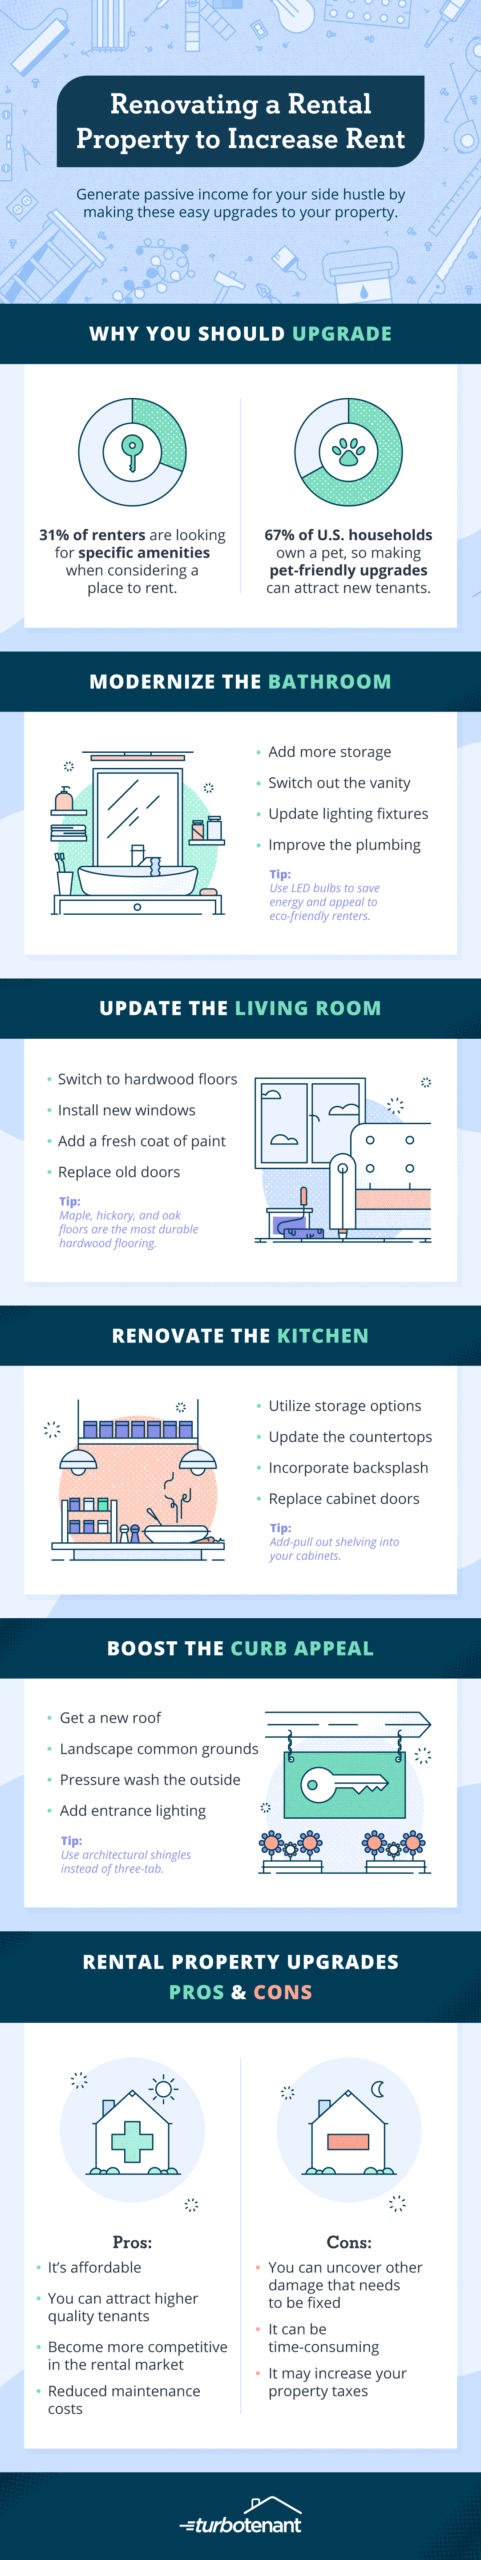 5 Easy Ways to Upgrade Your Rental Home